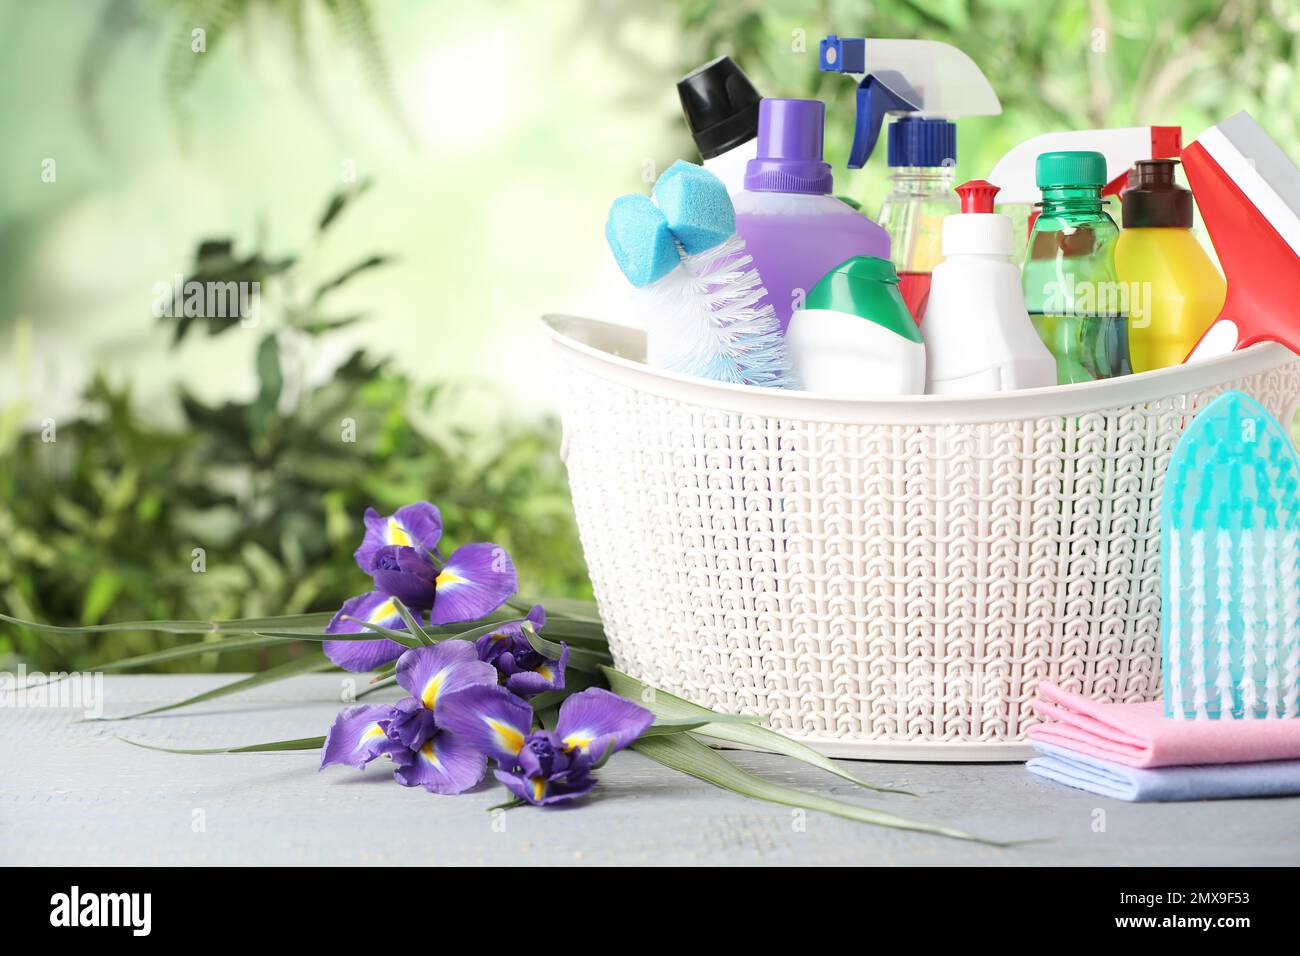 Spring flowers and cleaning supplies on light wooden table Stock Photo